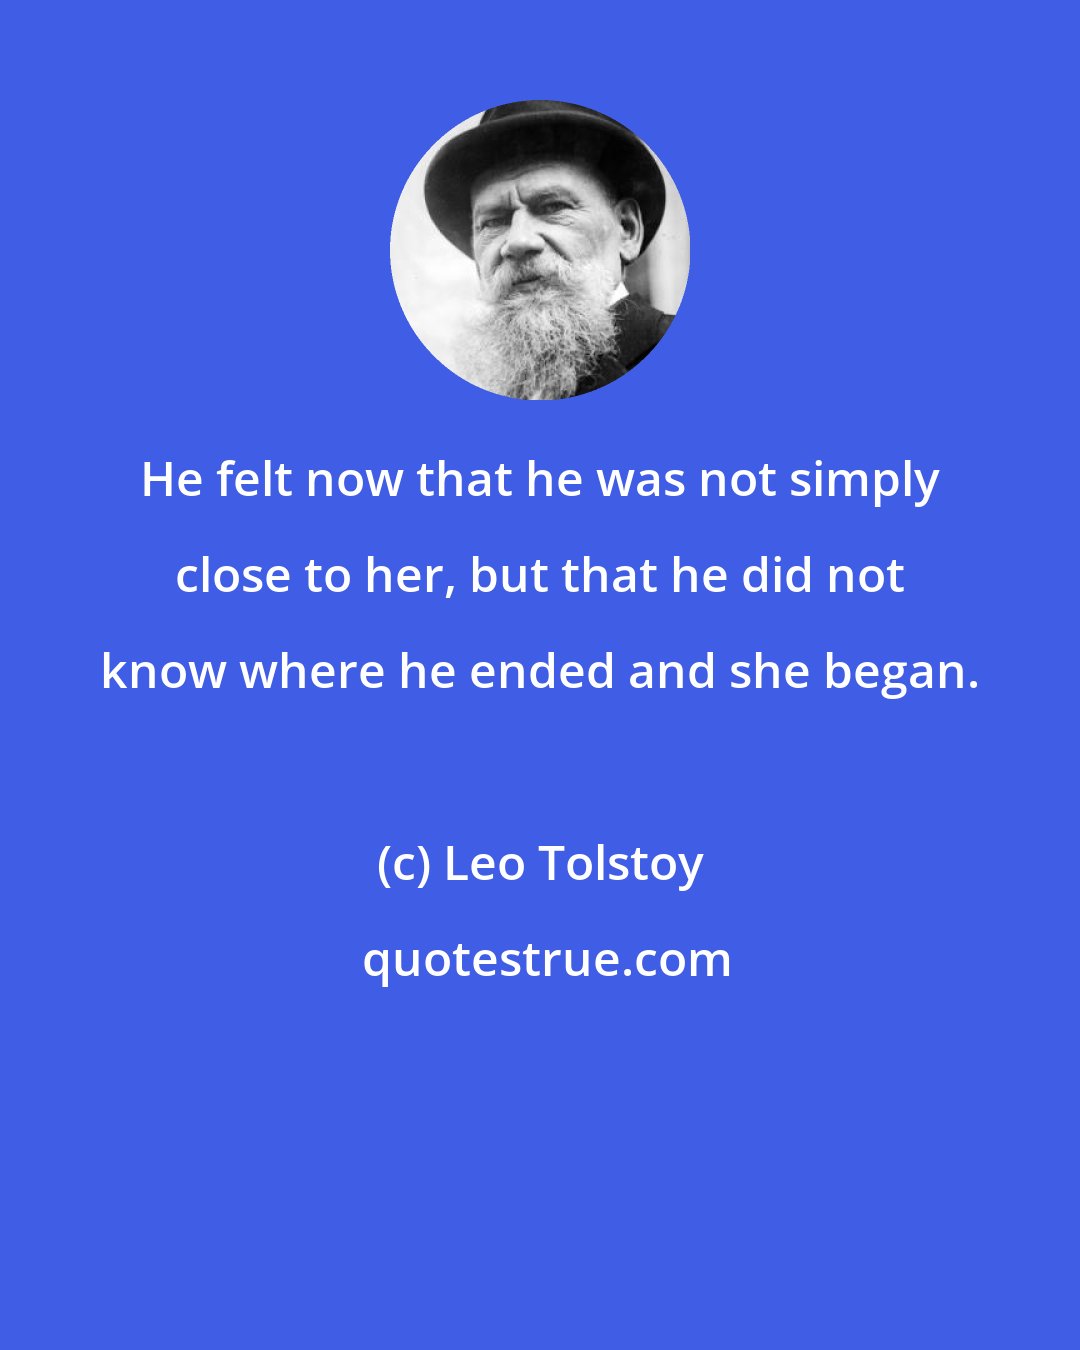 Leo Tolstoy: He felt now that he was not simply close to her, but that he did not know where he ended and she began.